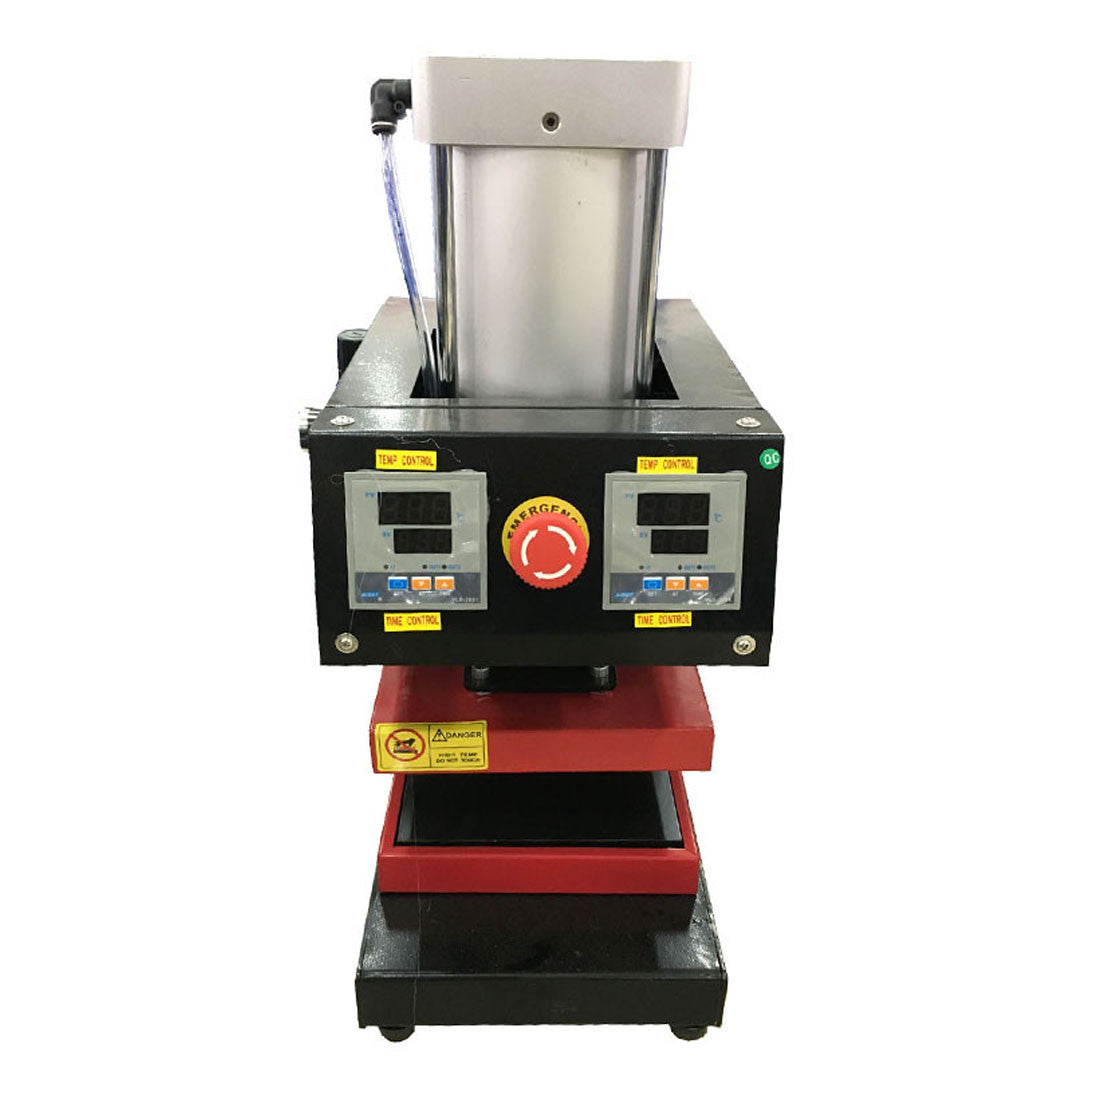 The pneumatic rosin heat press are with pause stop button